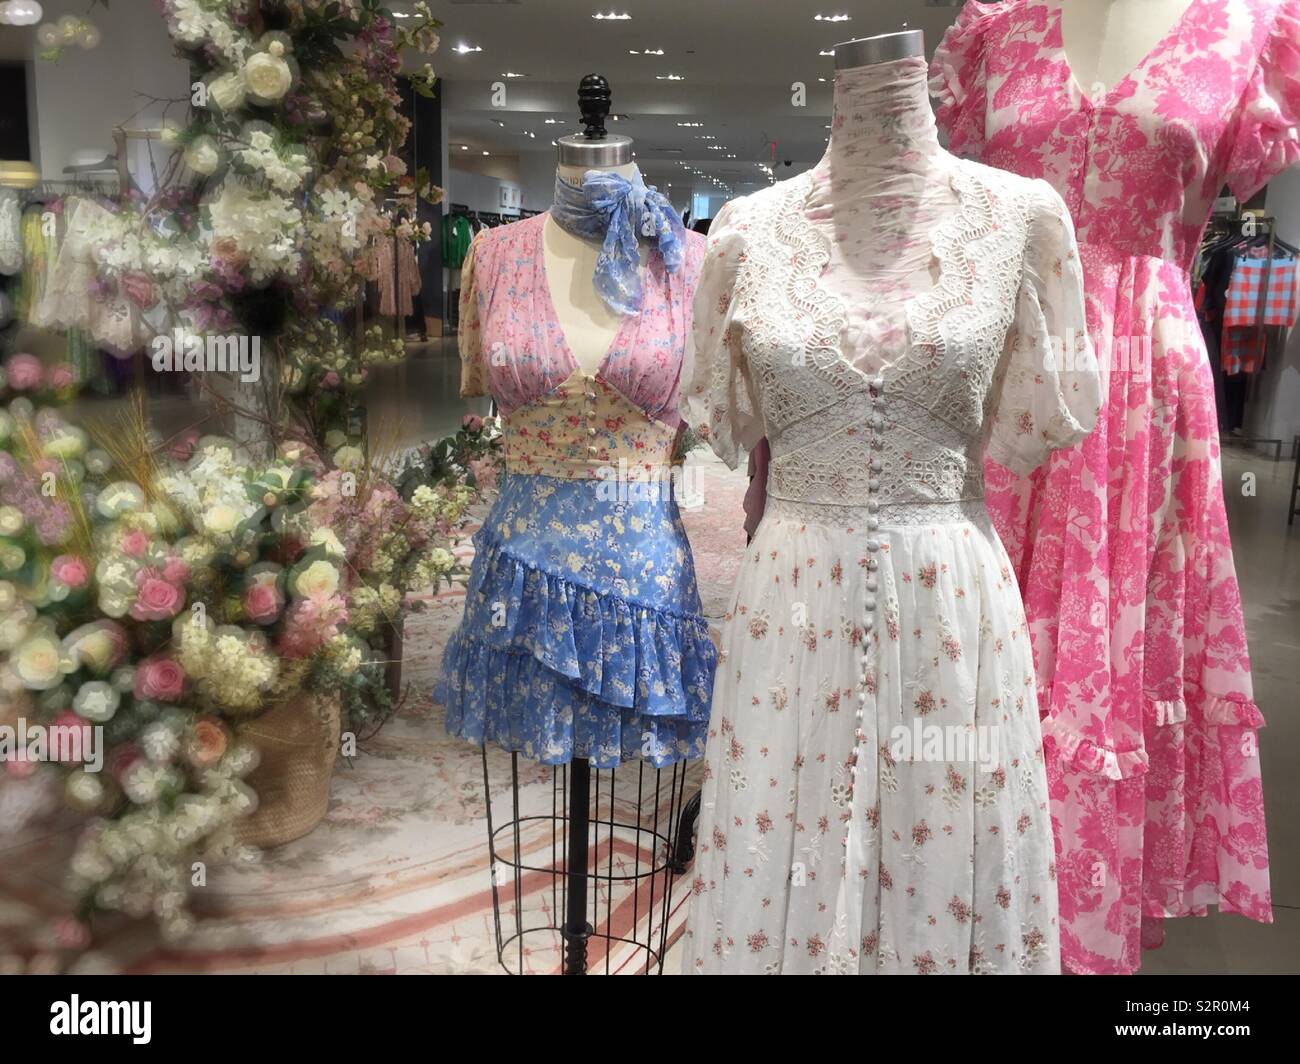 Saks Fifth Avenue Display of frilly summer dresses, NYC, USA Stock Photo -  Alamy